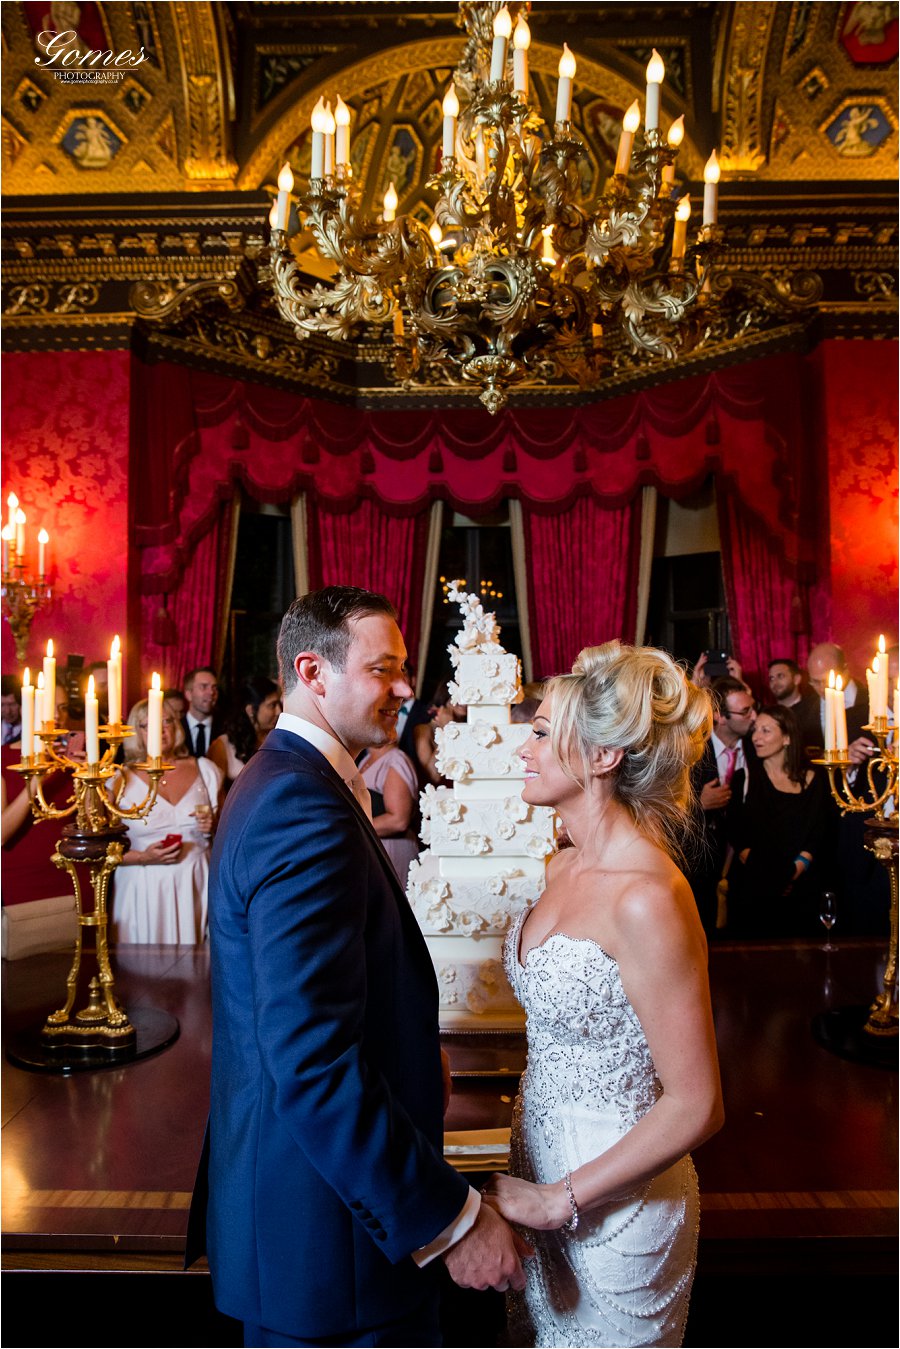 Weddings in the William Kent Room at the Ritz in London